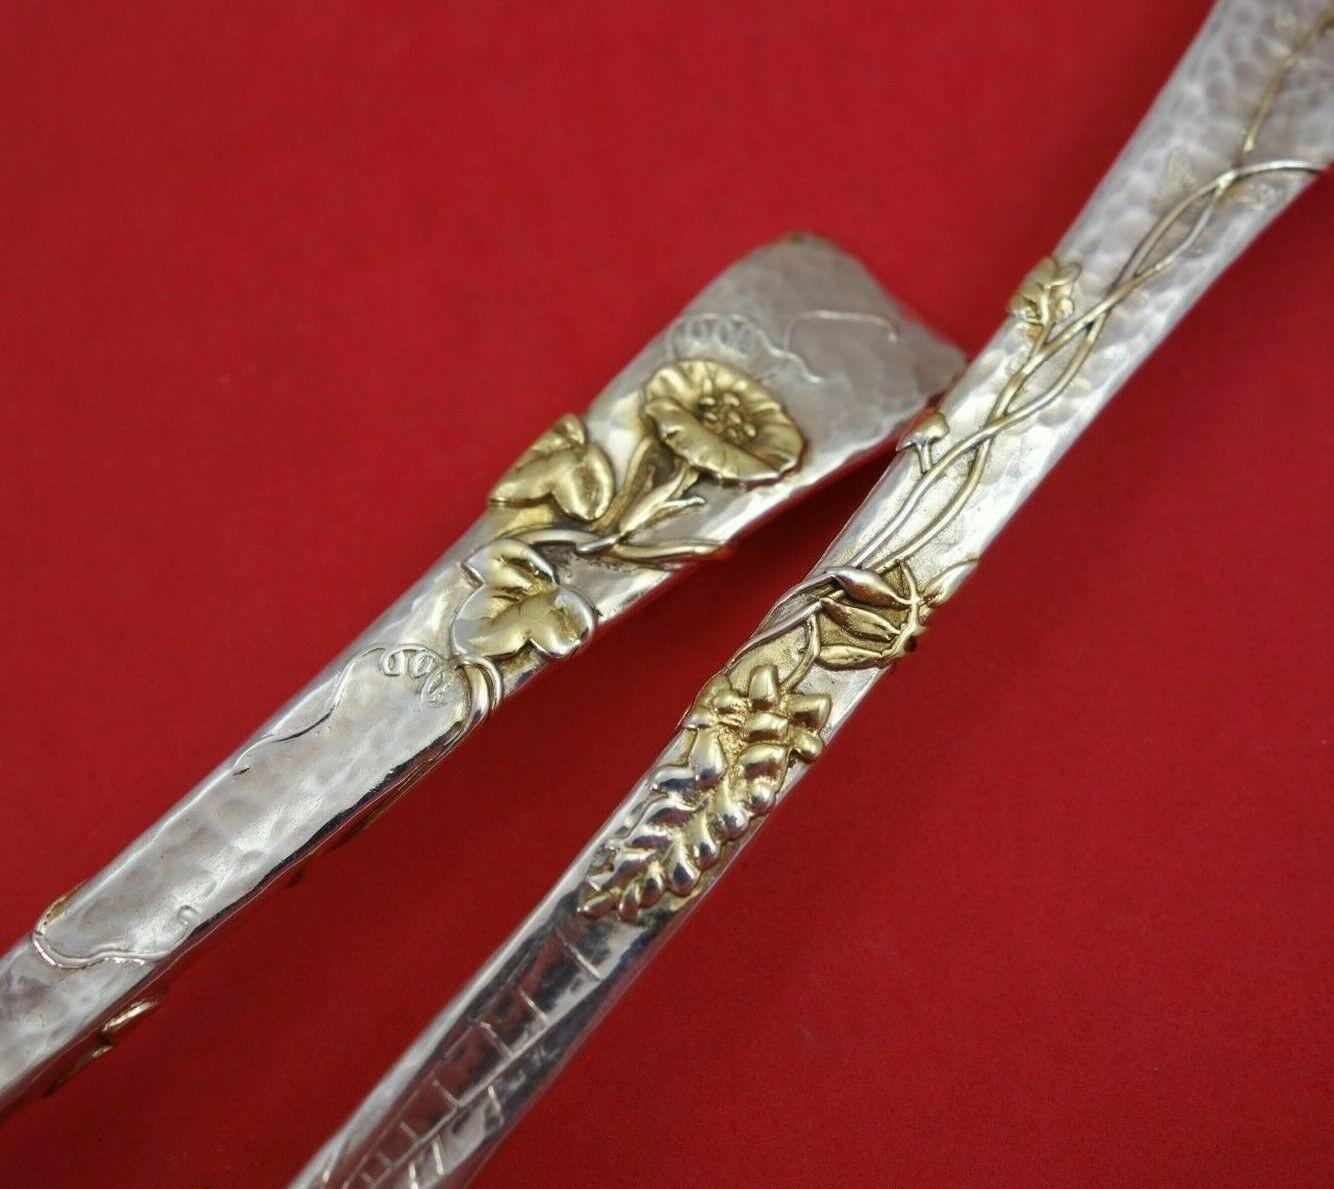 Superb sterling silver salad serving set 2-piece gold washed with applied flowers, vines, gold spider, and web 10 3/4